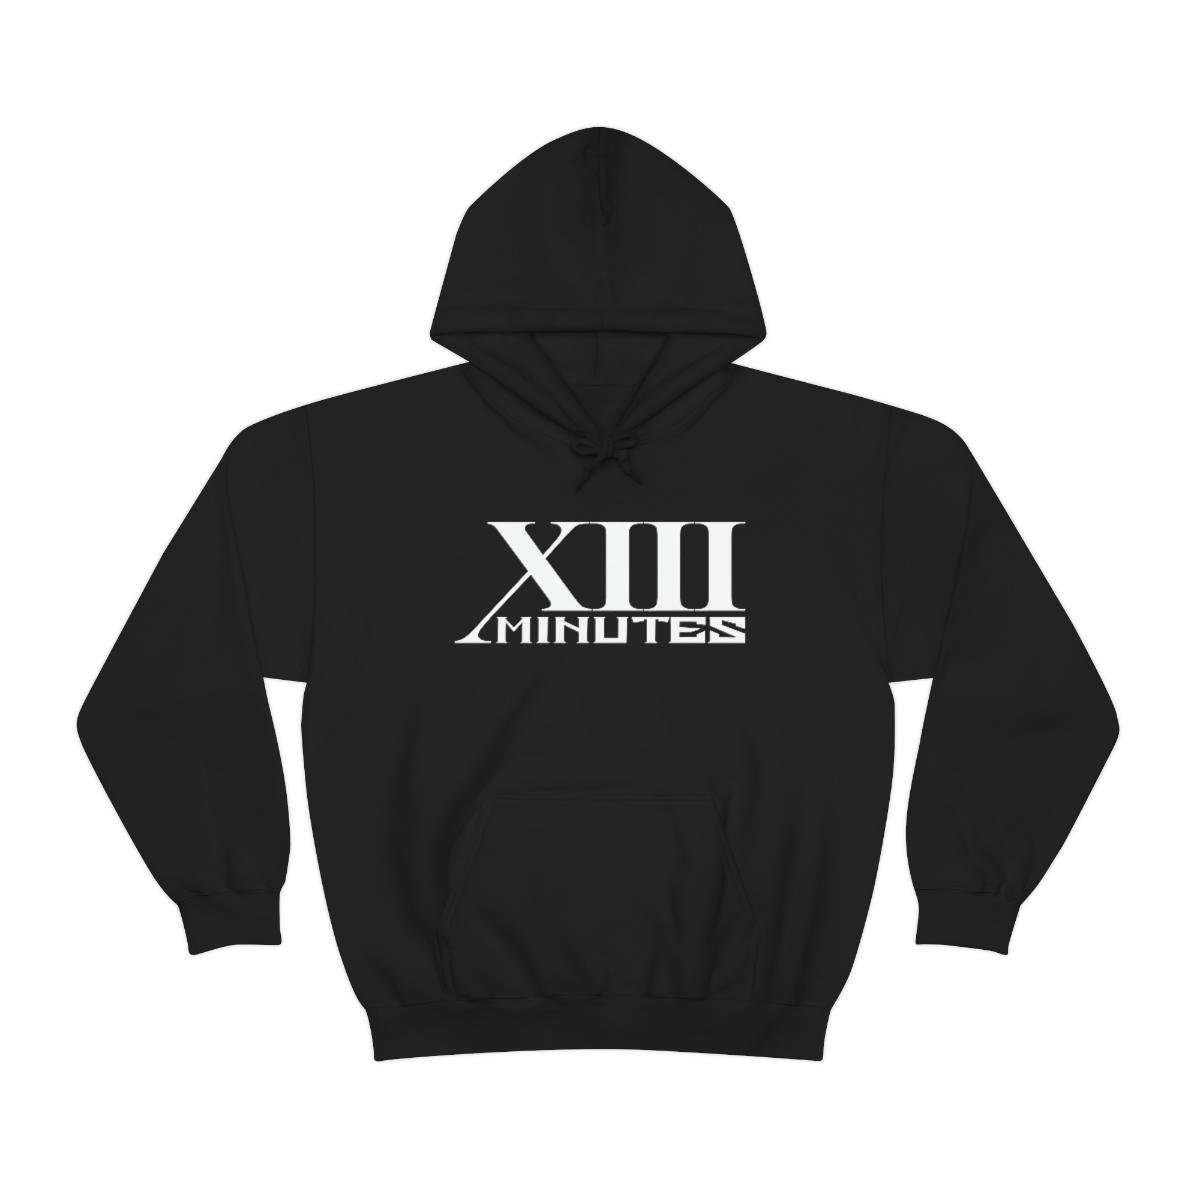 XIII Minutes Family Pullover Hooded Sweatshirt (2 Sided)